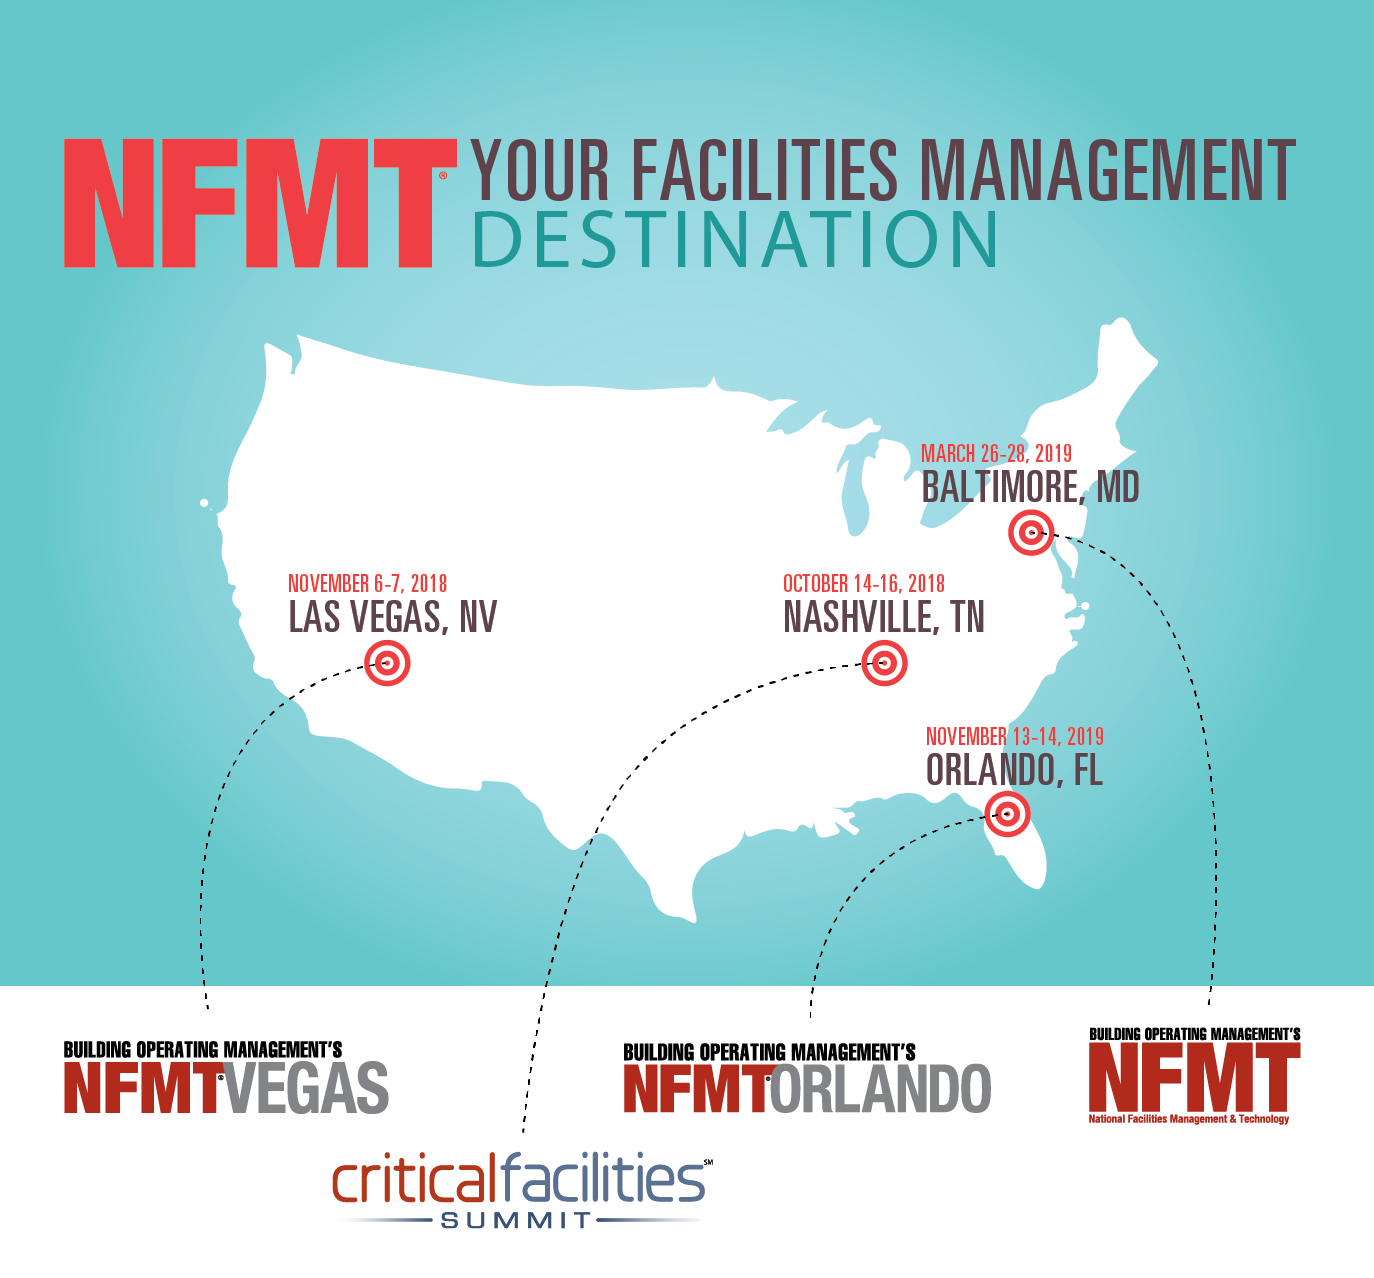 NFMT Facility Training and Education. The Best Facilities Conference